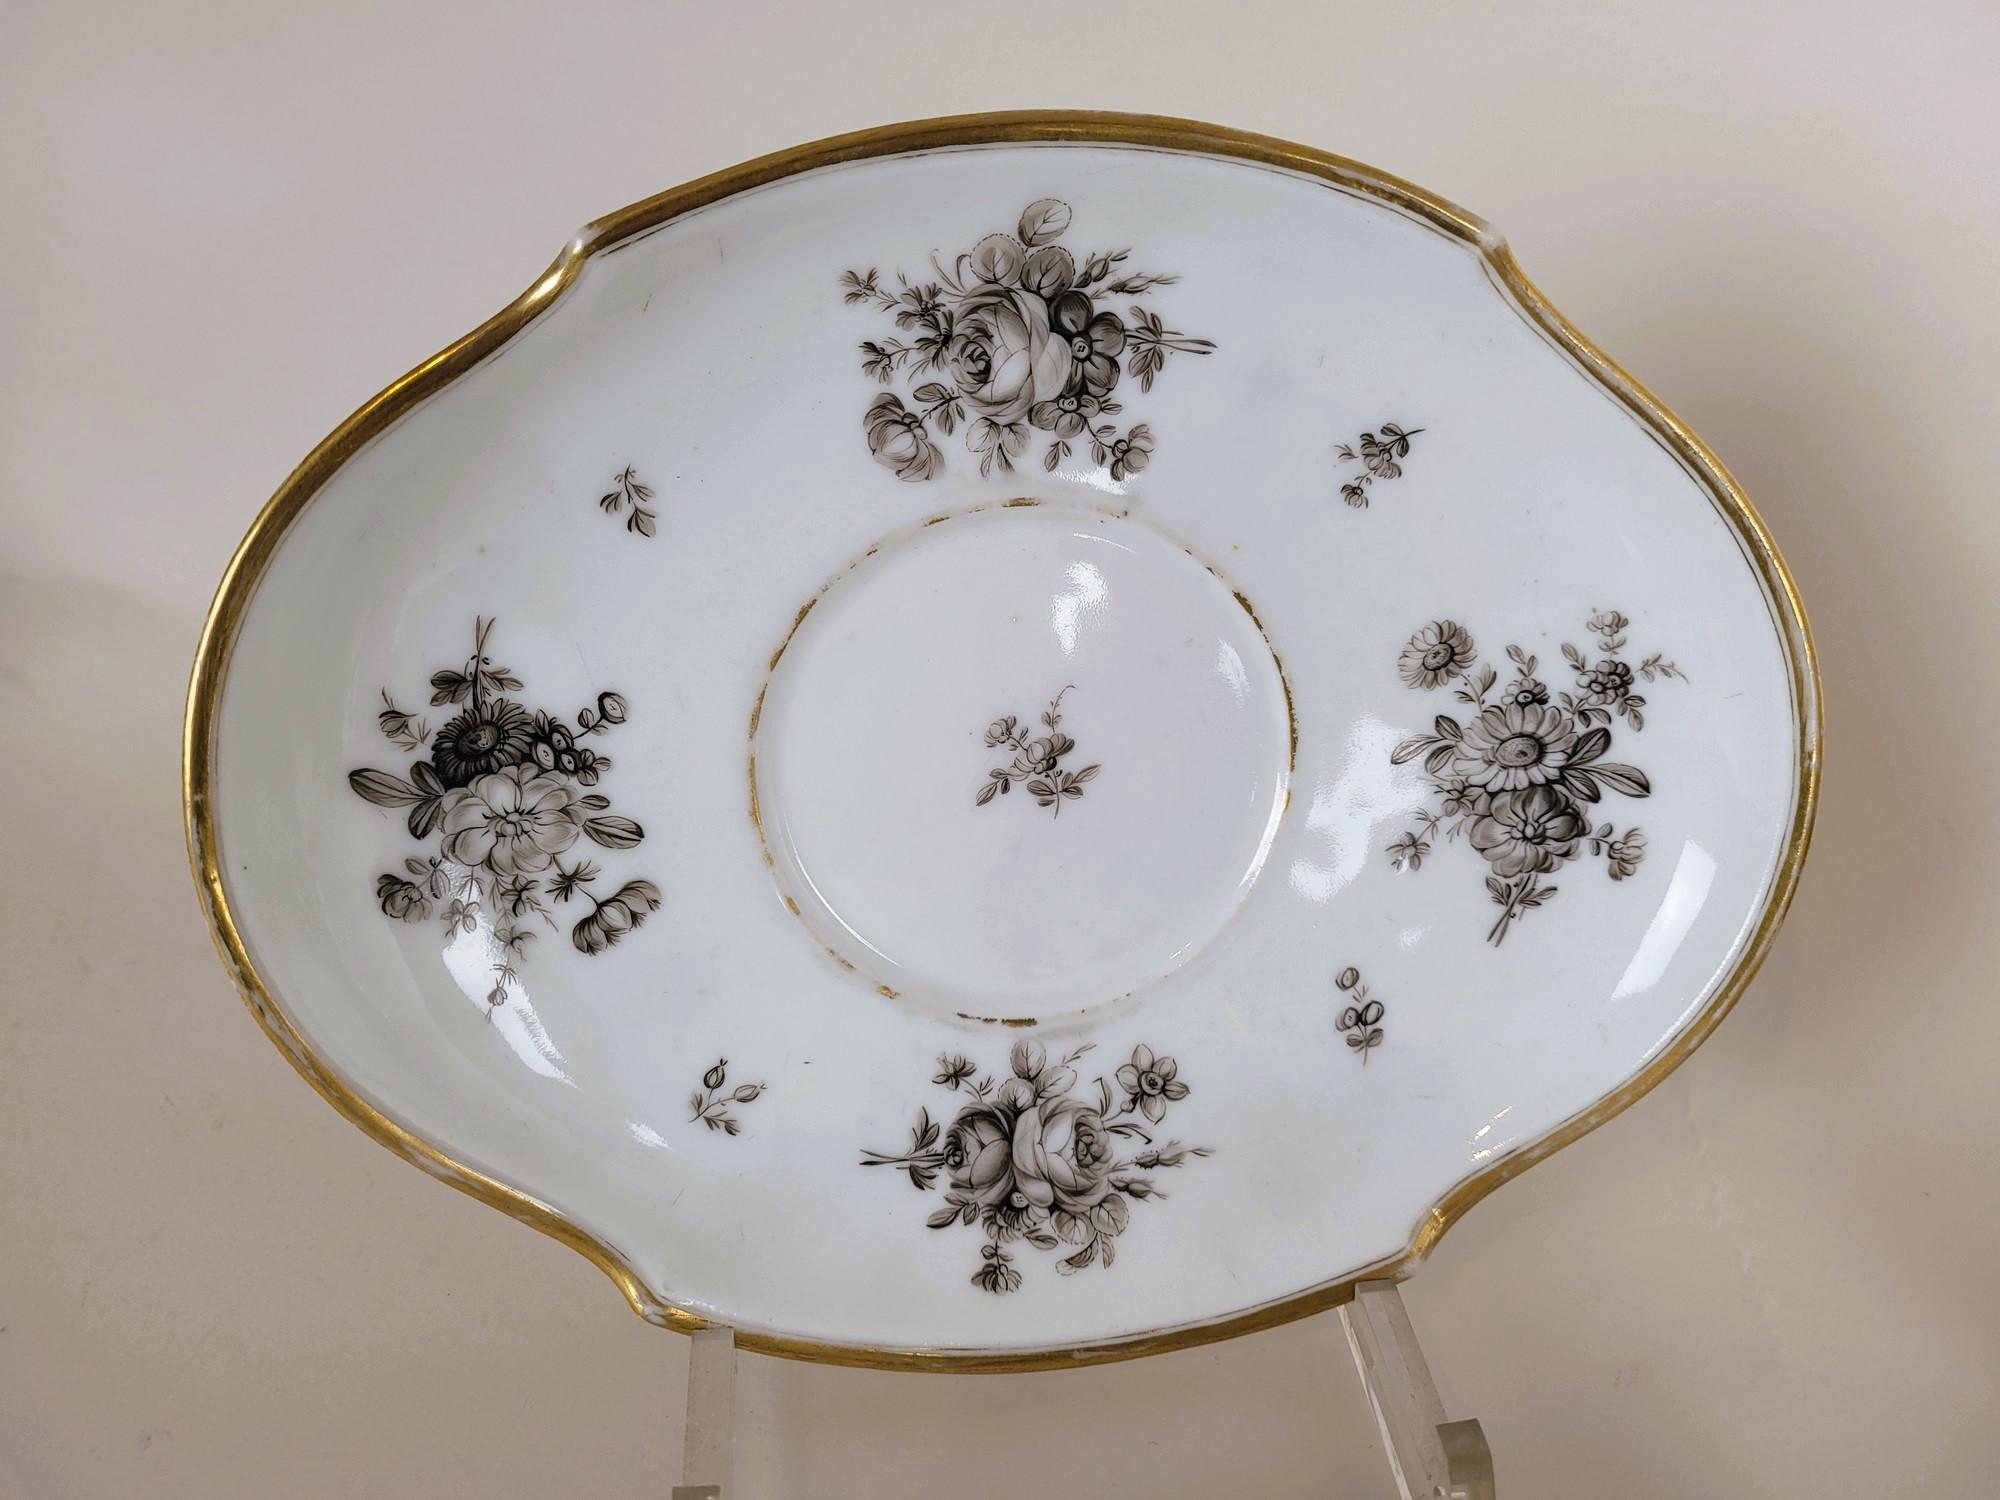 Part of a porcelain coffee service, decorated with black flowers on a white background, with gilding highlights on the edges.

It consists of 4 cups (good condition), 2 bowls (good condition), 1 milk jug (a chip under the spout and a small cooking